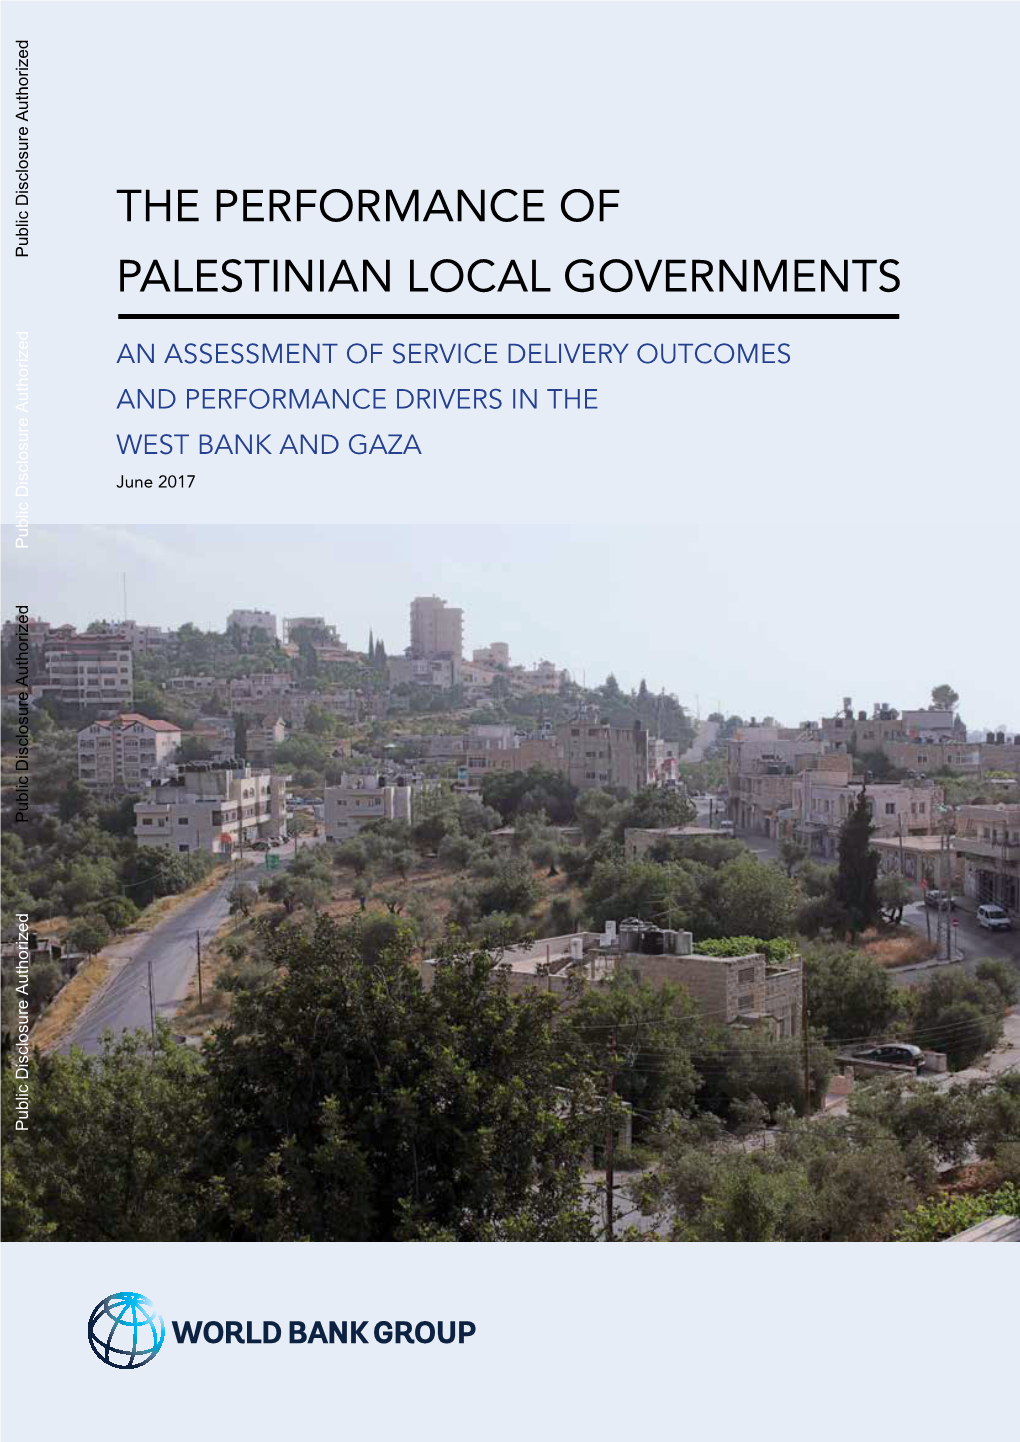 The Performance of Palestinian Local Governments